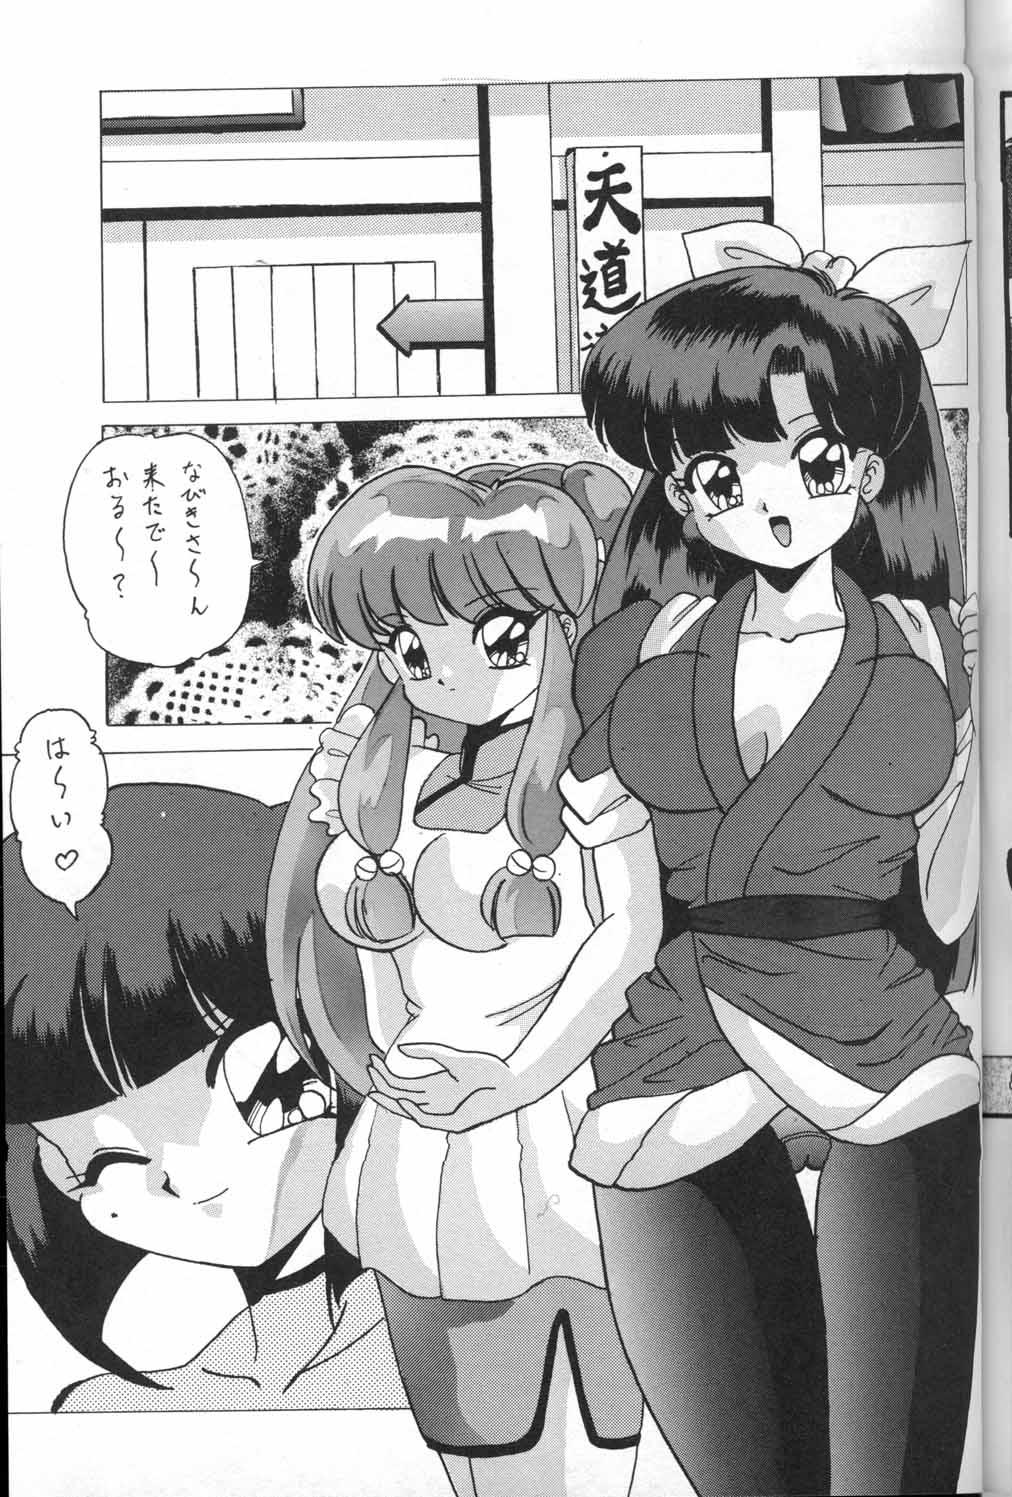 Stockings Katze12 - Ranma 12 Role Play - Page 1